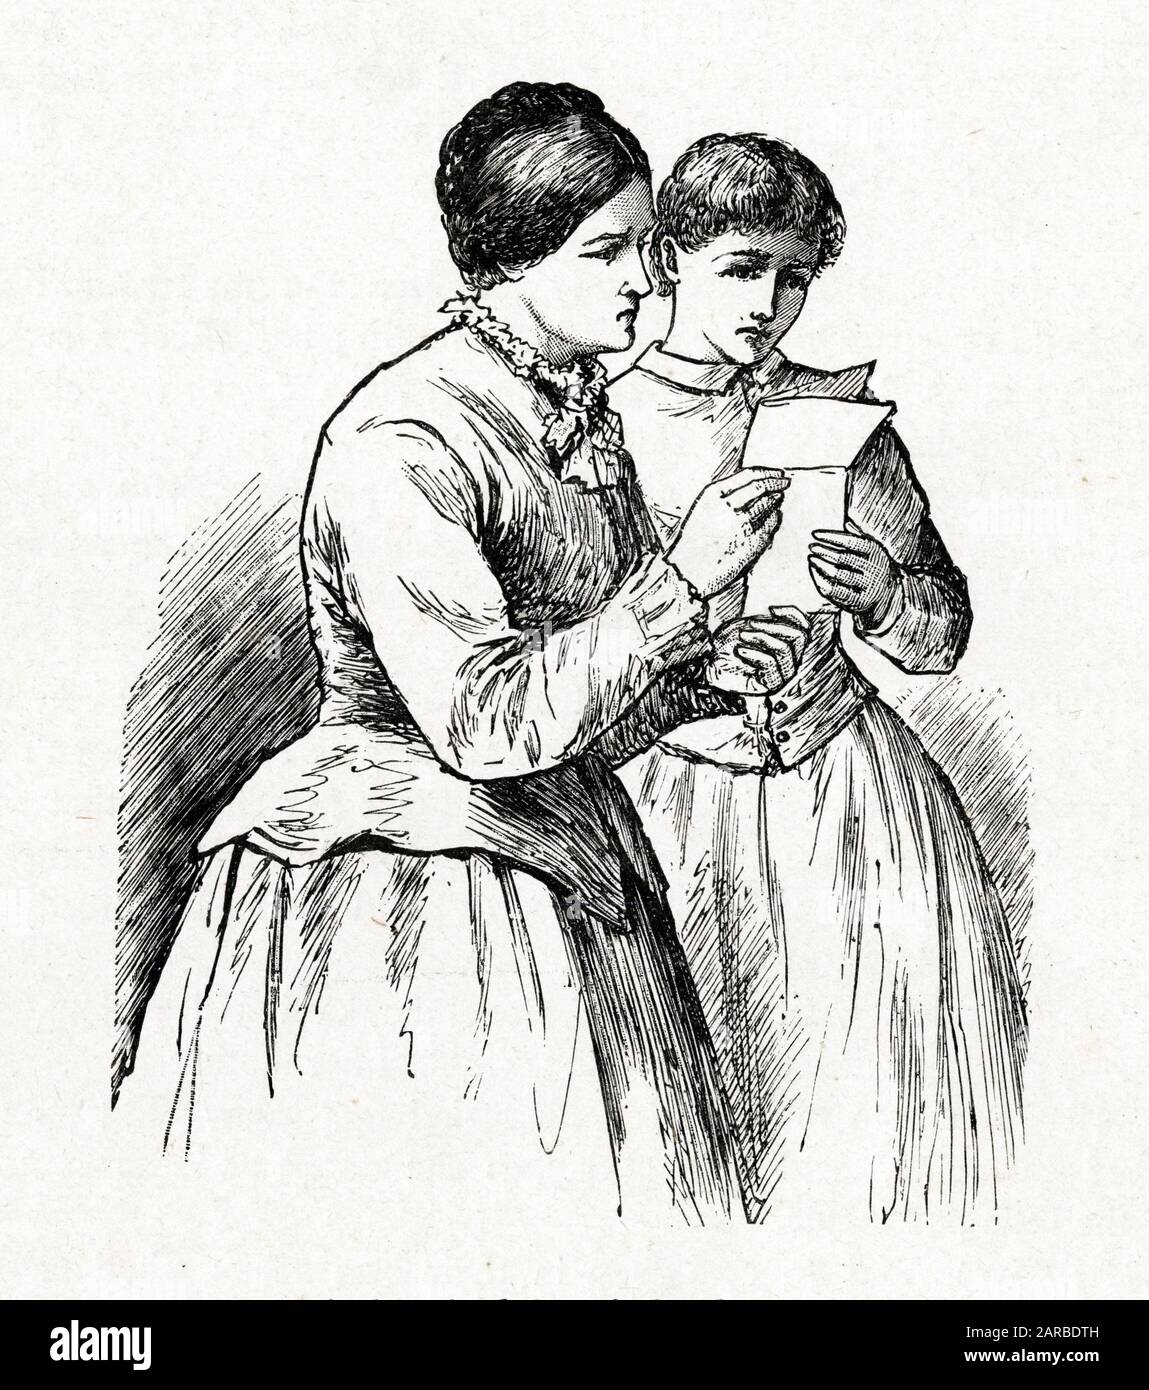 'Little Women' by Louisa May Alcott - Mrs March and Jo read a letter, purporting to be a love letter to Meg from John Brooke, but actually a practical joke and forgery. Stock Photo